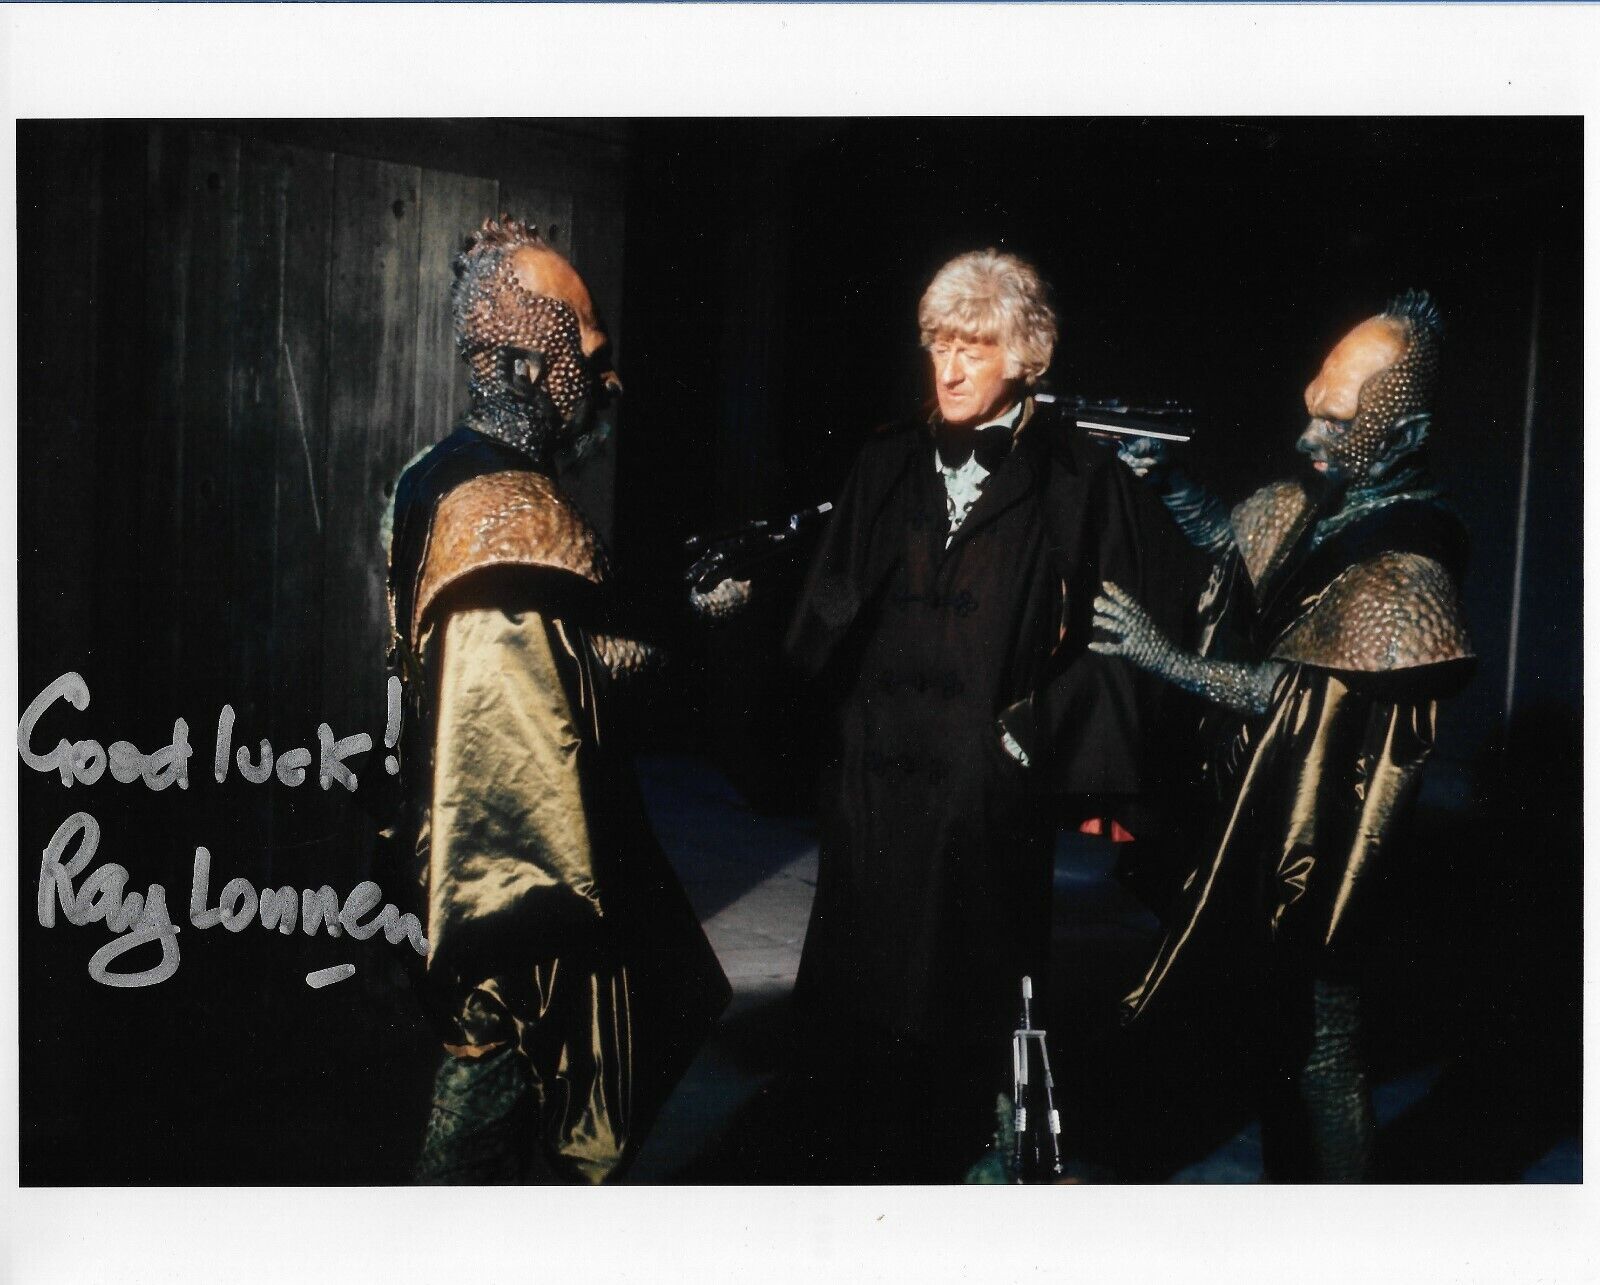 Ray Lonnen DOCTOR WHO signed 8 X 10